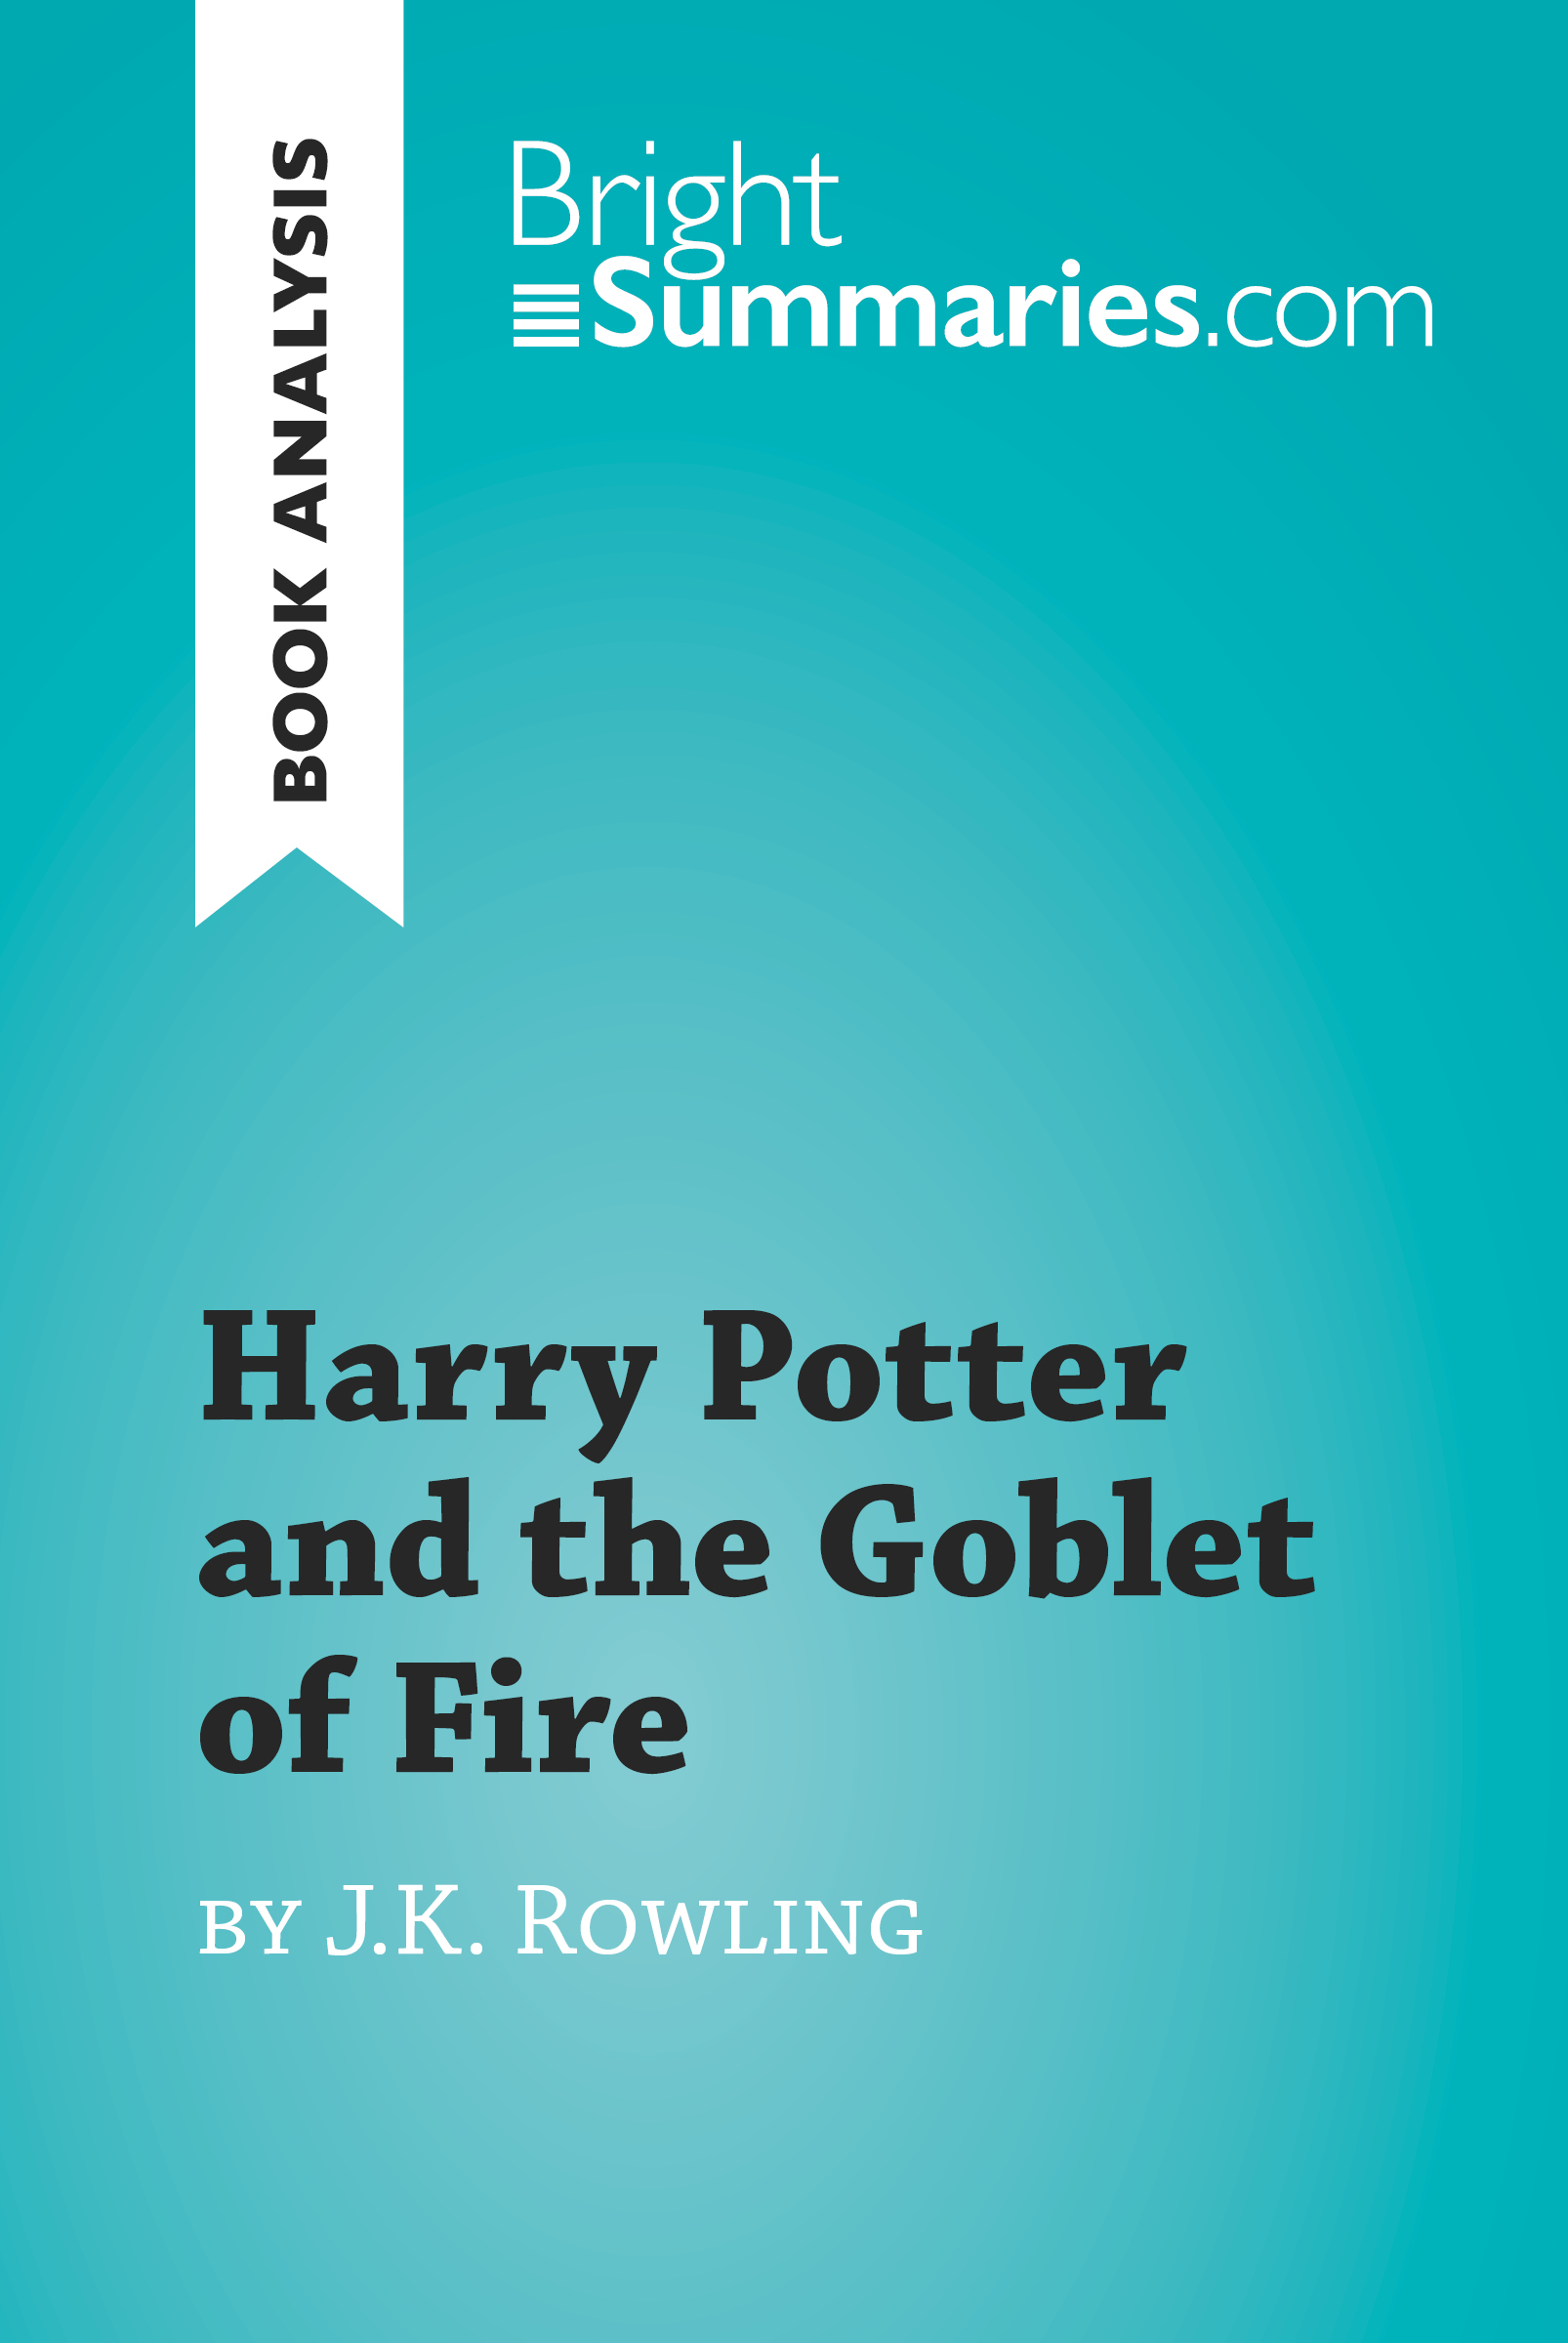 harry potter and the goblet of fire book summary